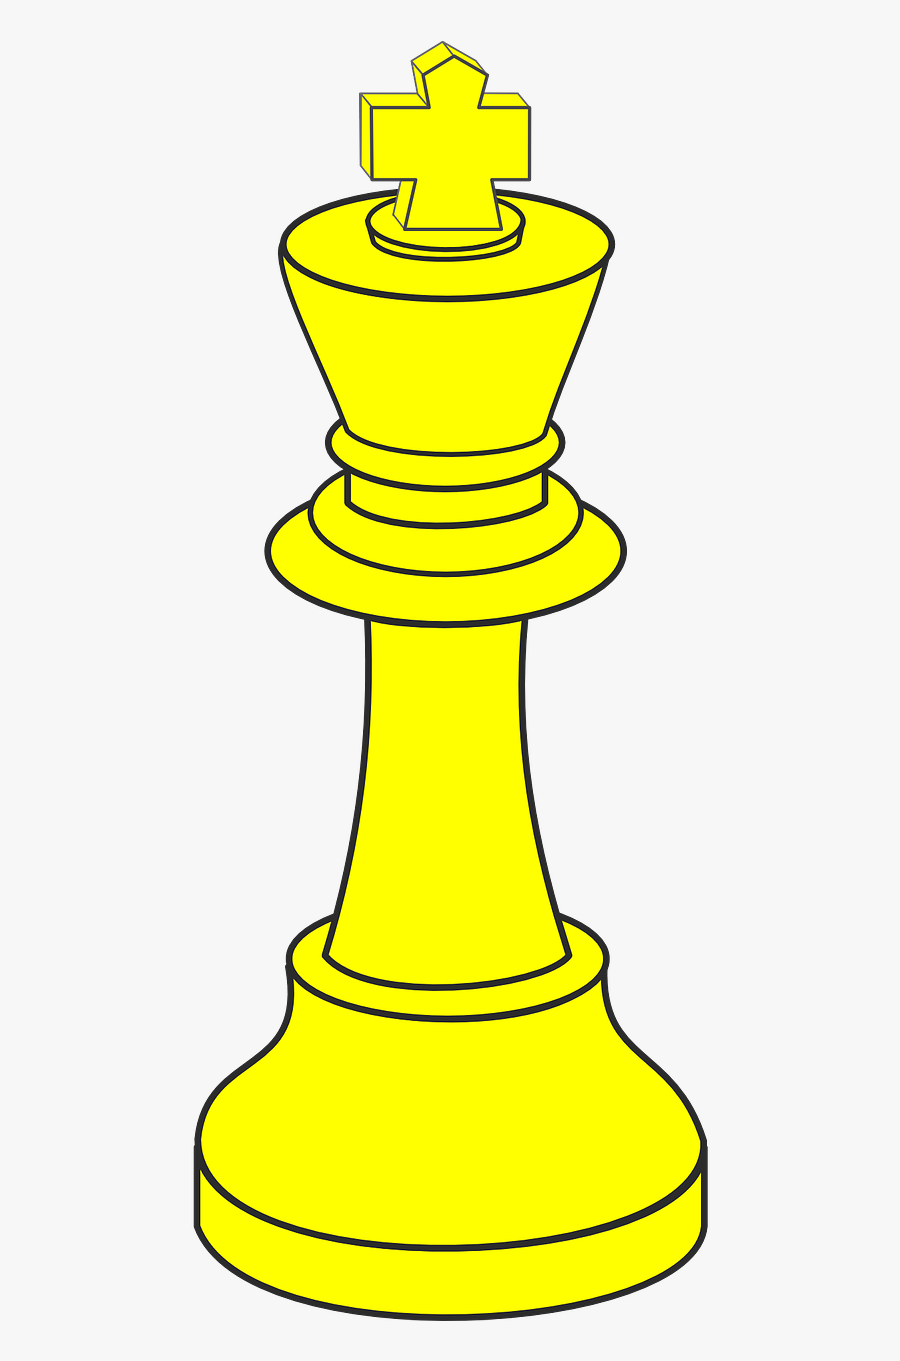 King Chess Piece Free Picture - King In Chess, Transparent Clipart